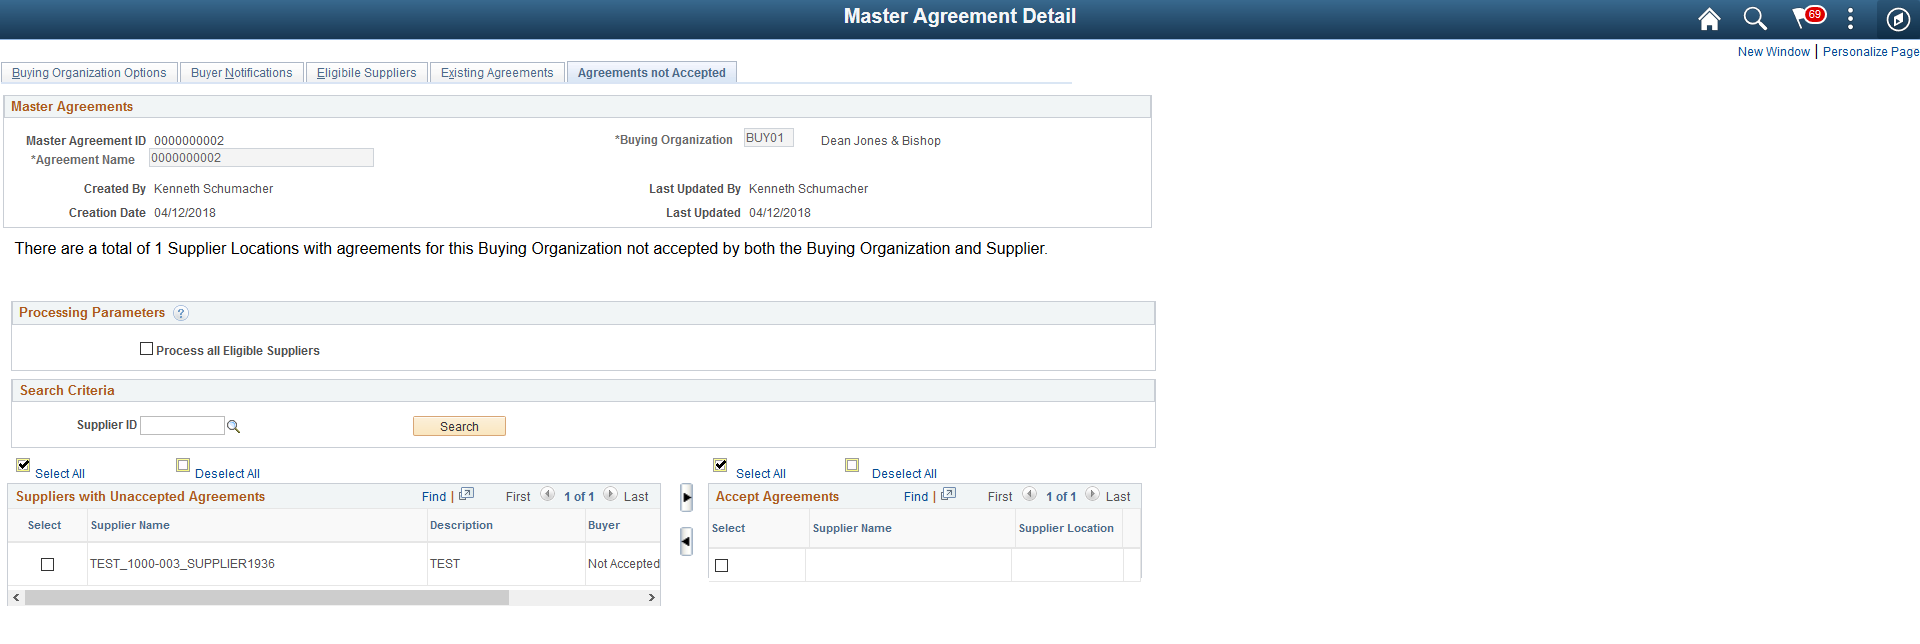 Master Agreements Detail - Agreements Not Accepted Page